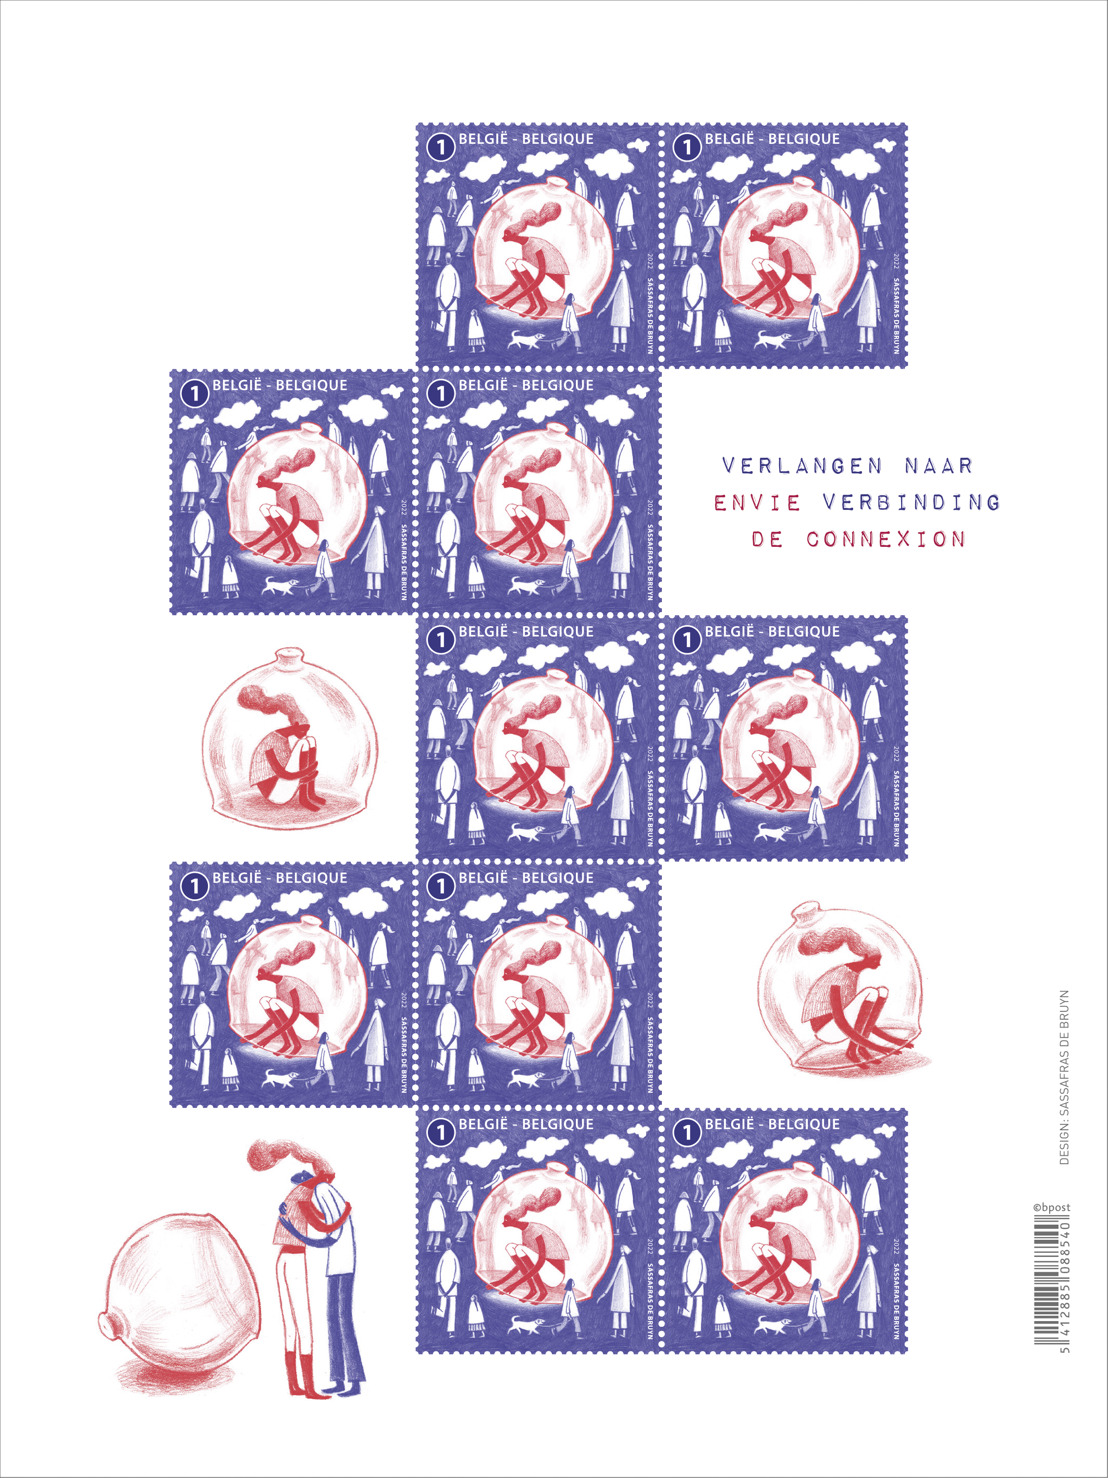 bpost encourages Belgians to reconnect with a free postcard campaign and a stamp on the theme “Yearning for connection”